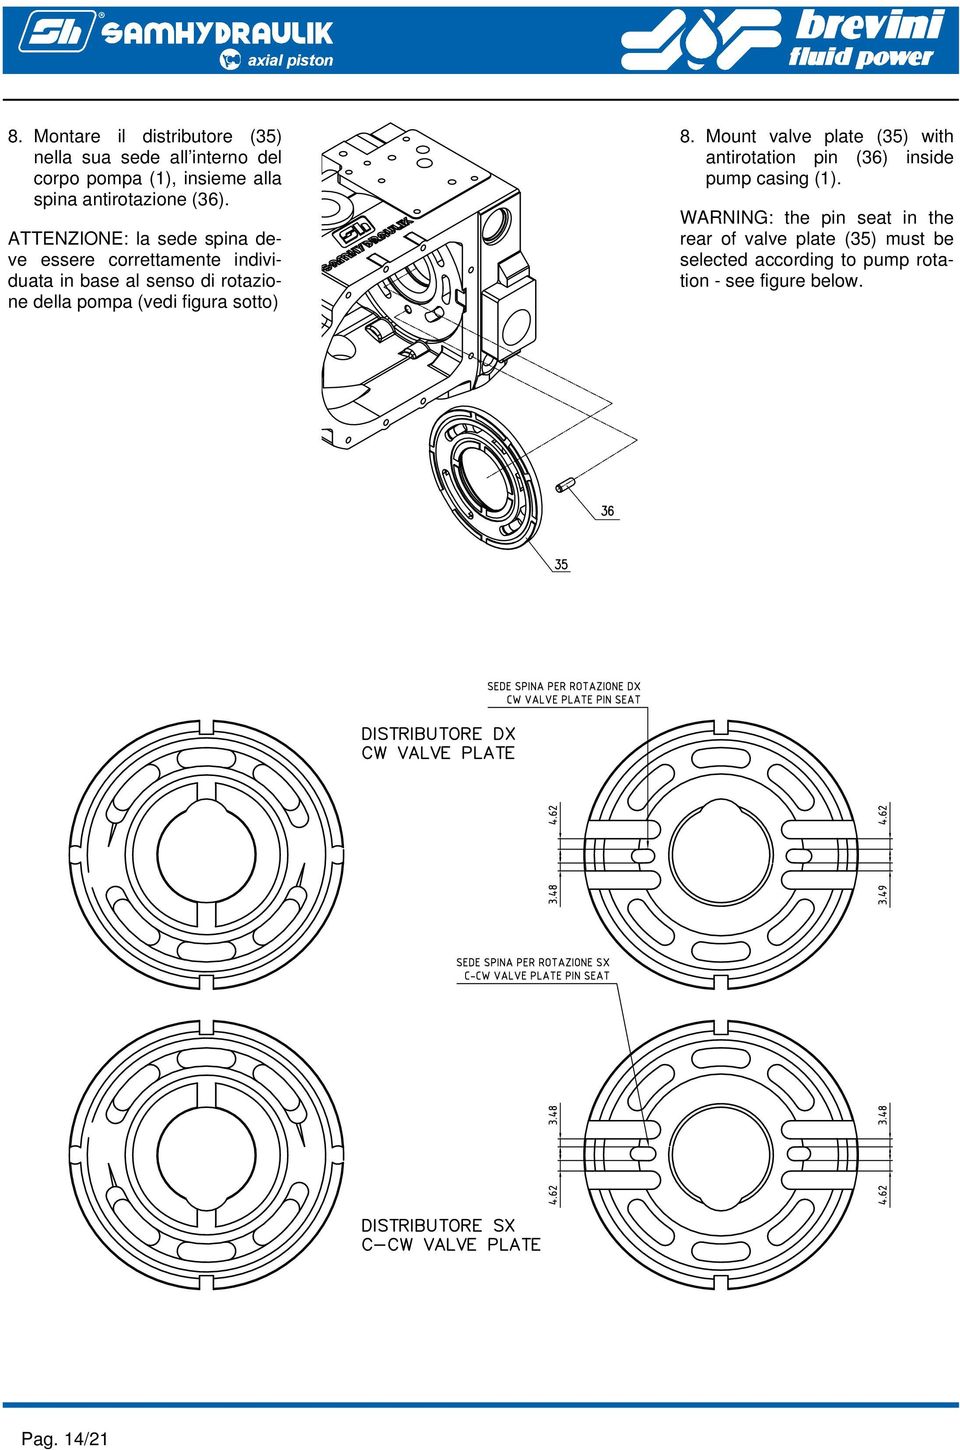 (vedi figura sotto) 8. Mount valve plate (35) with antirotation pin (36) inside pump casing (1).